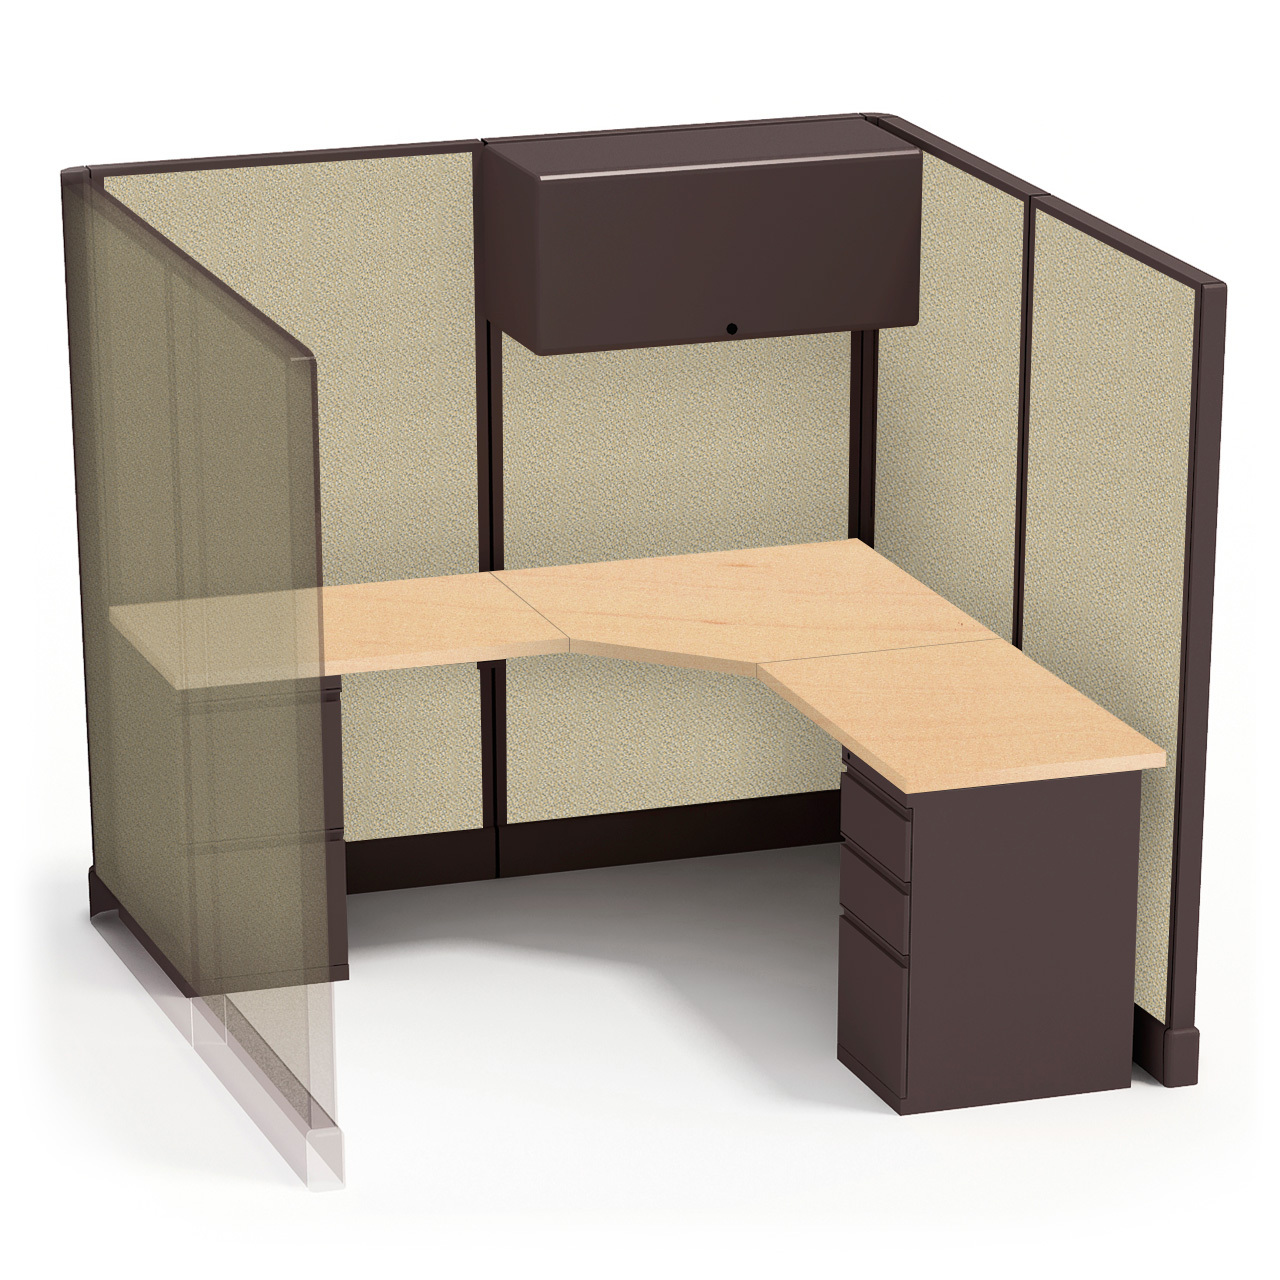 6X6 Office Cubilces | Get Your Free Quote | Cubicle By Design